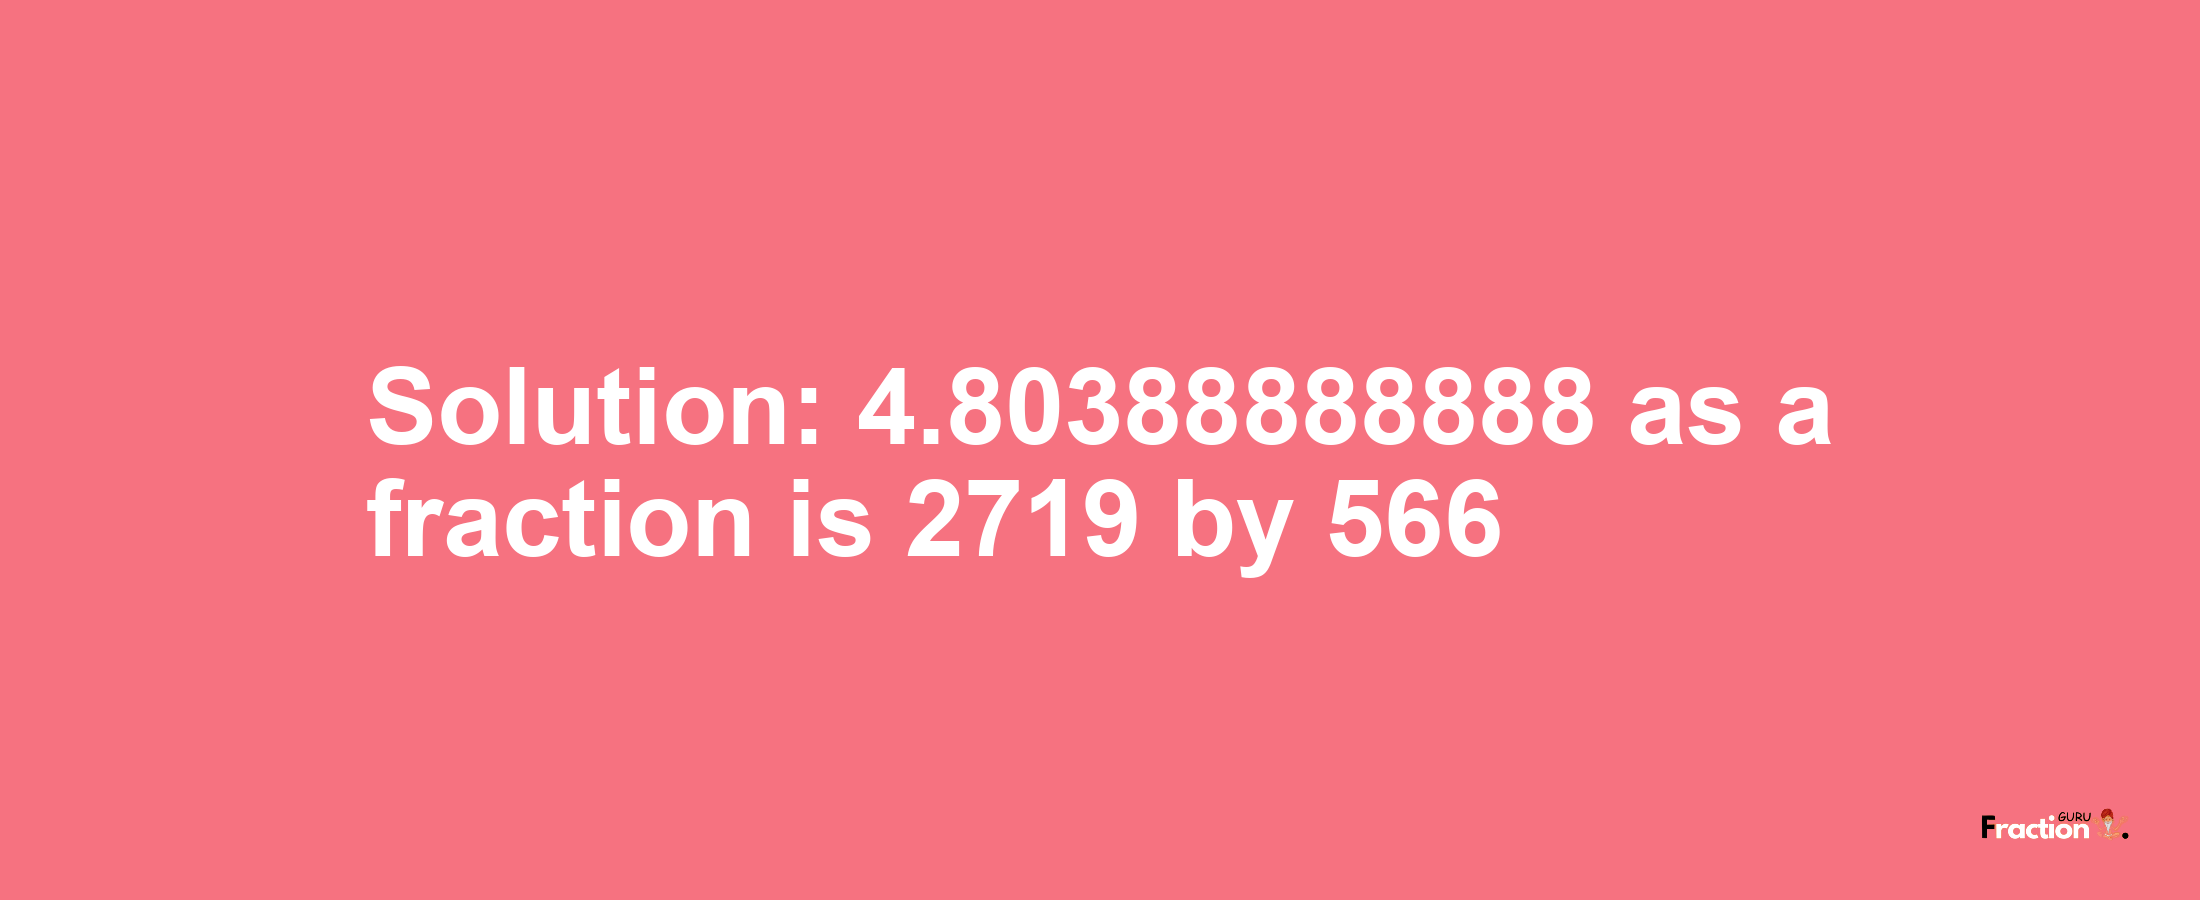 Solution:4.80388888888 as a fraction is 2719/566